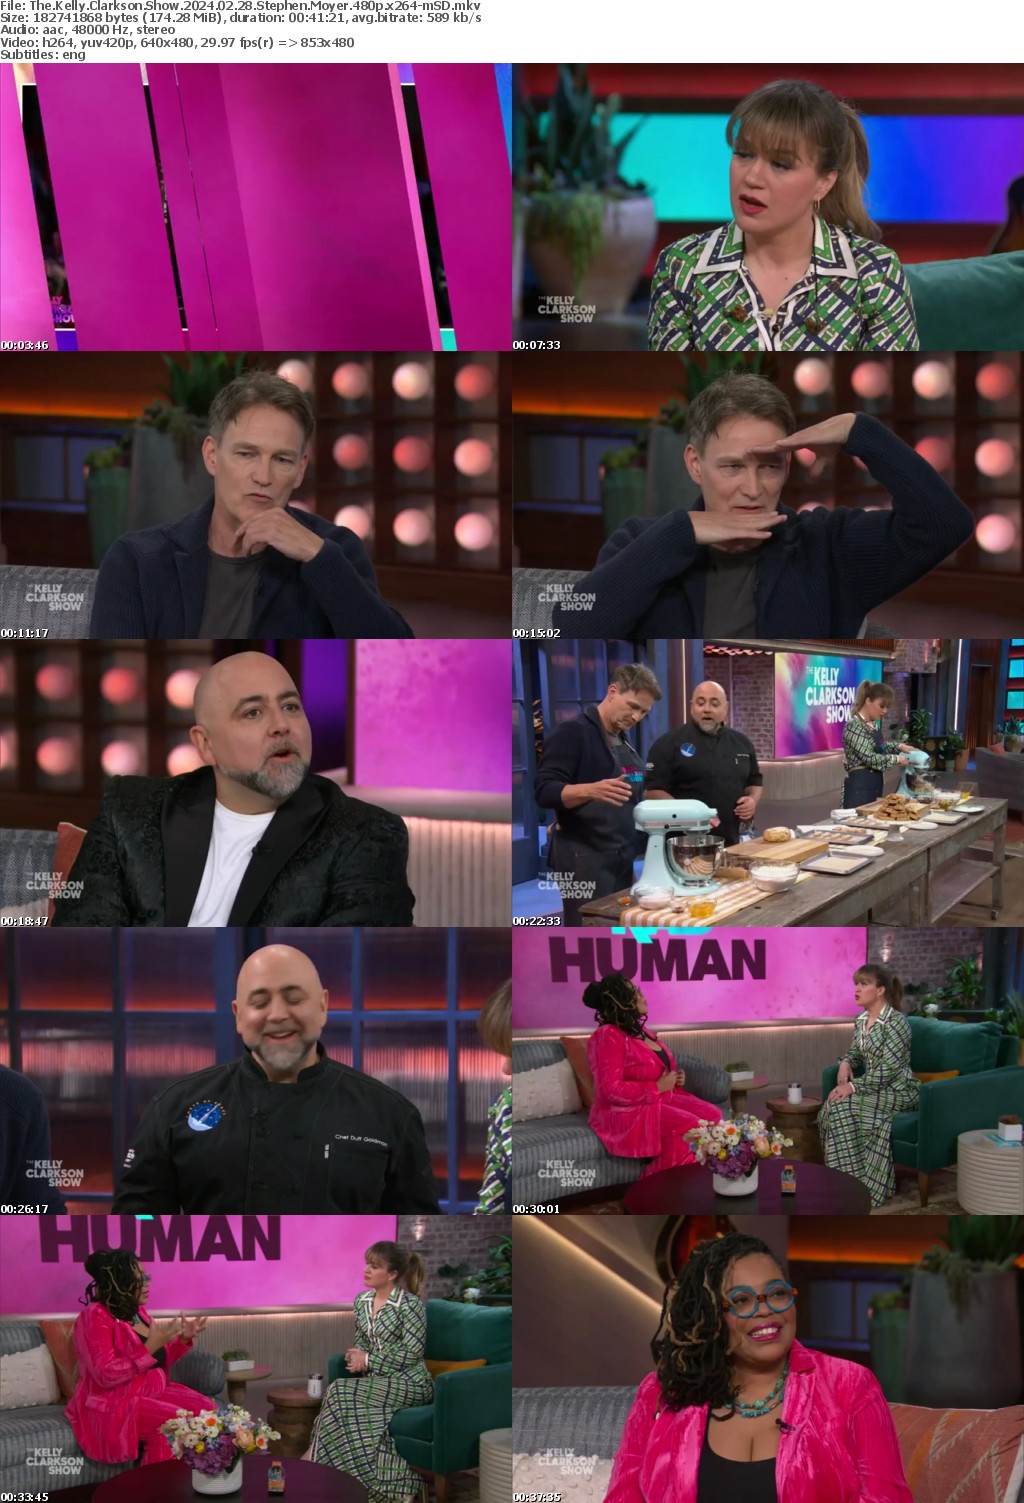 The Kelly Clarkson Show 2024 02 28 Stephen Moyer 480p x264-mSD